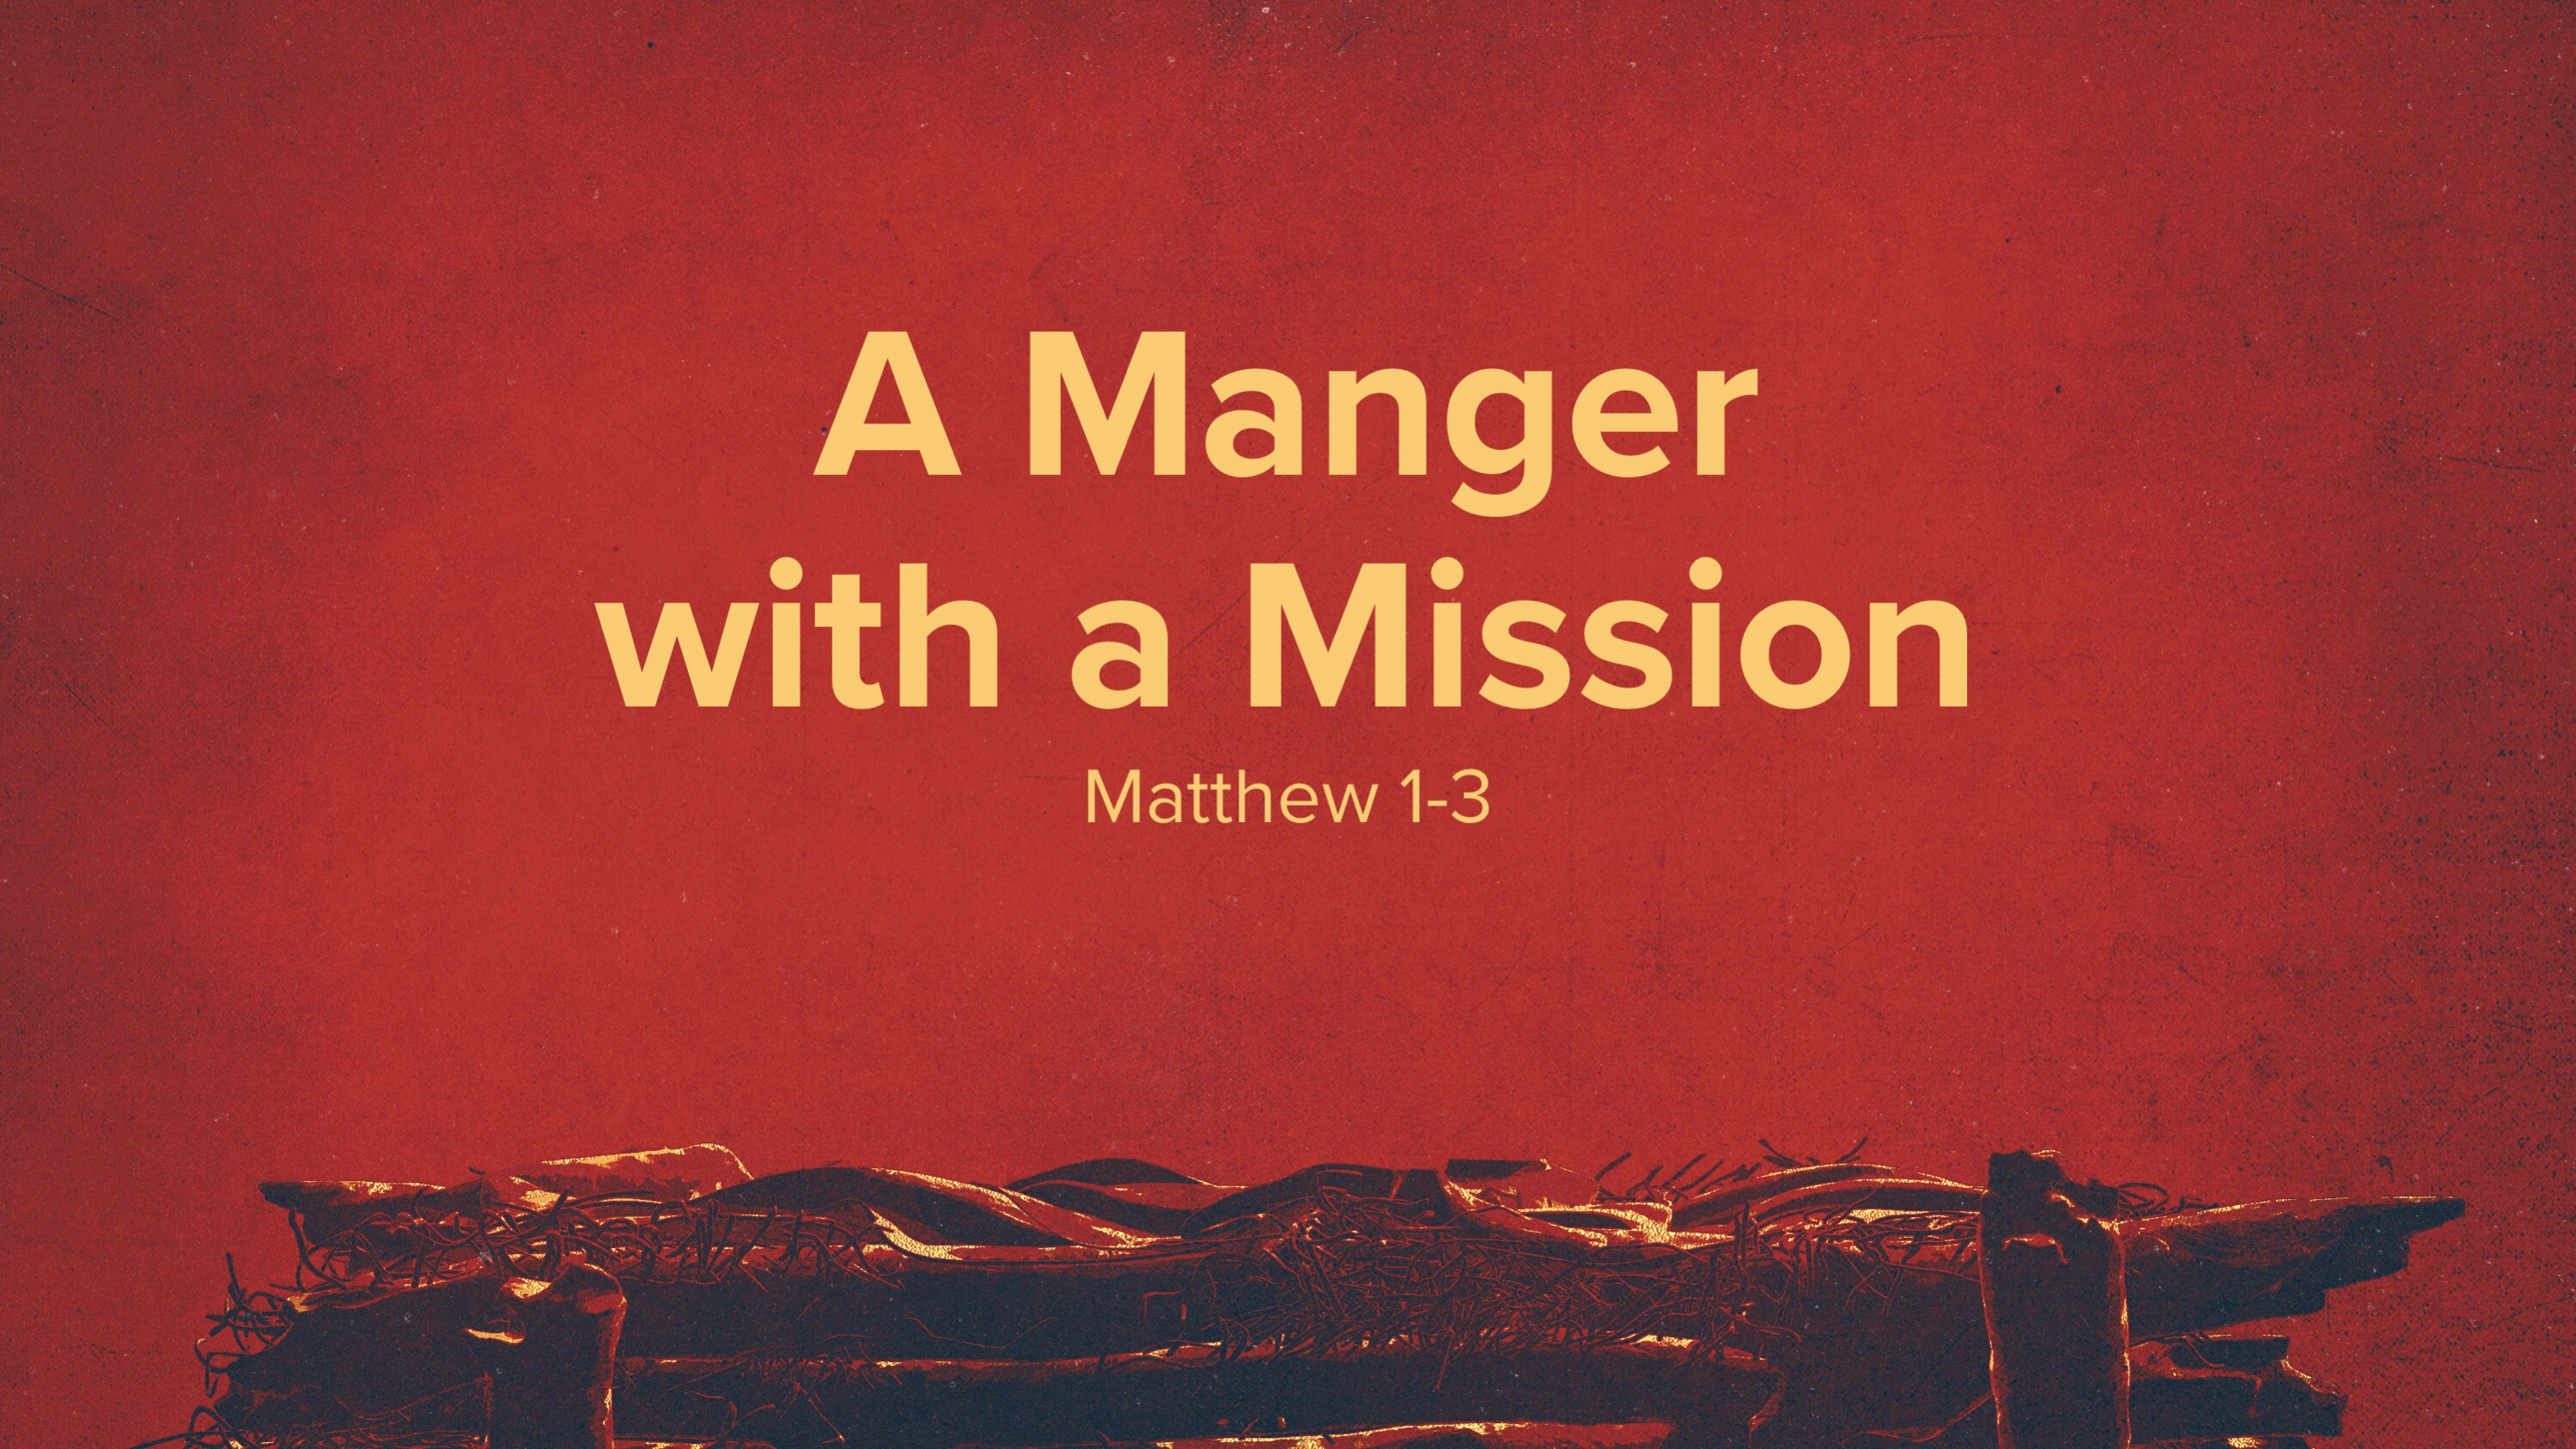 A Manger with a Mission